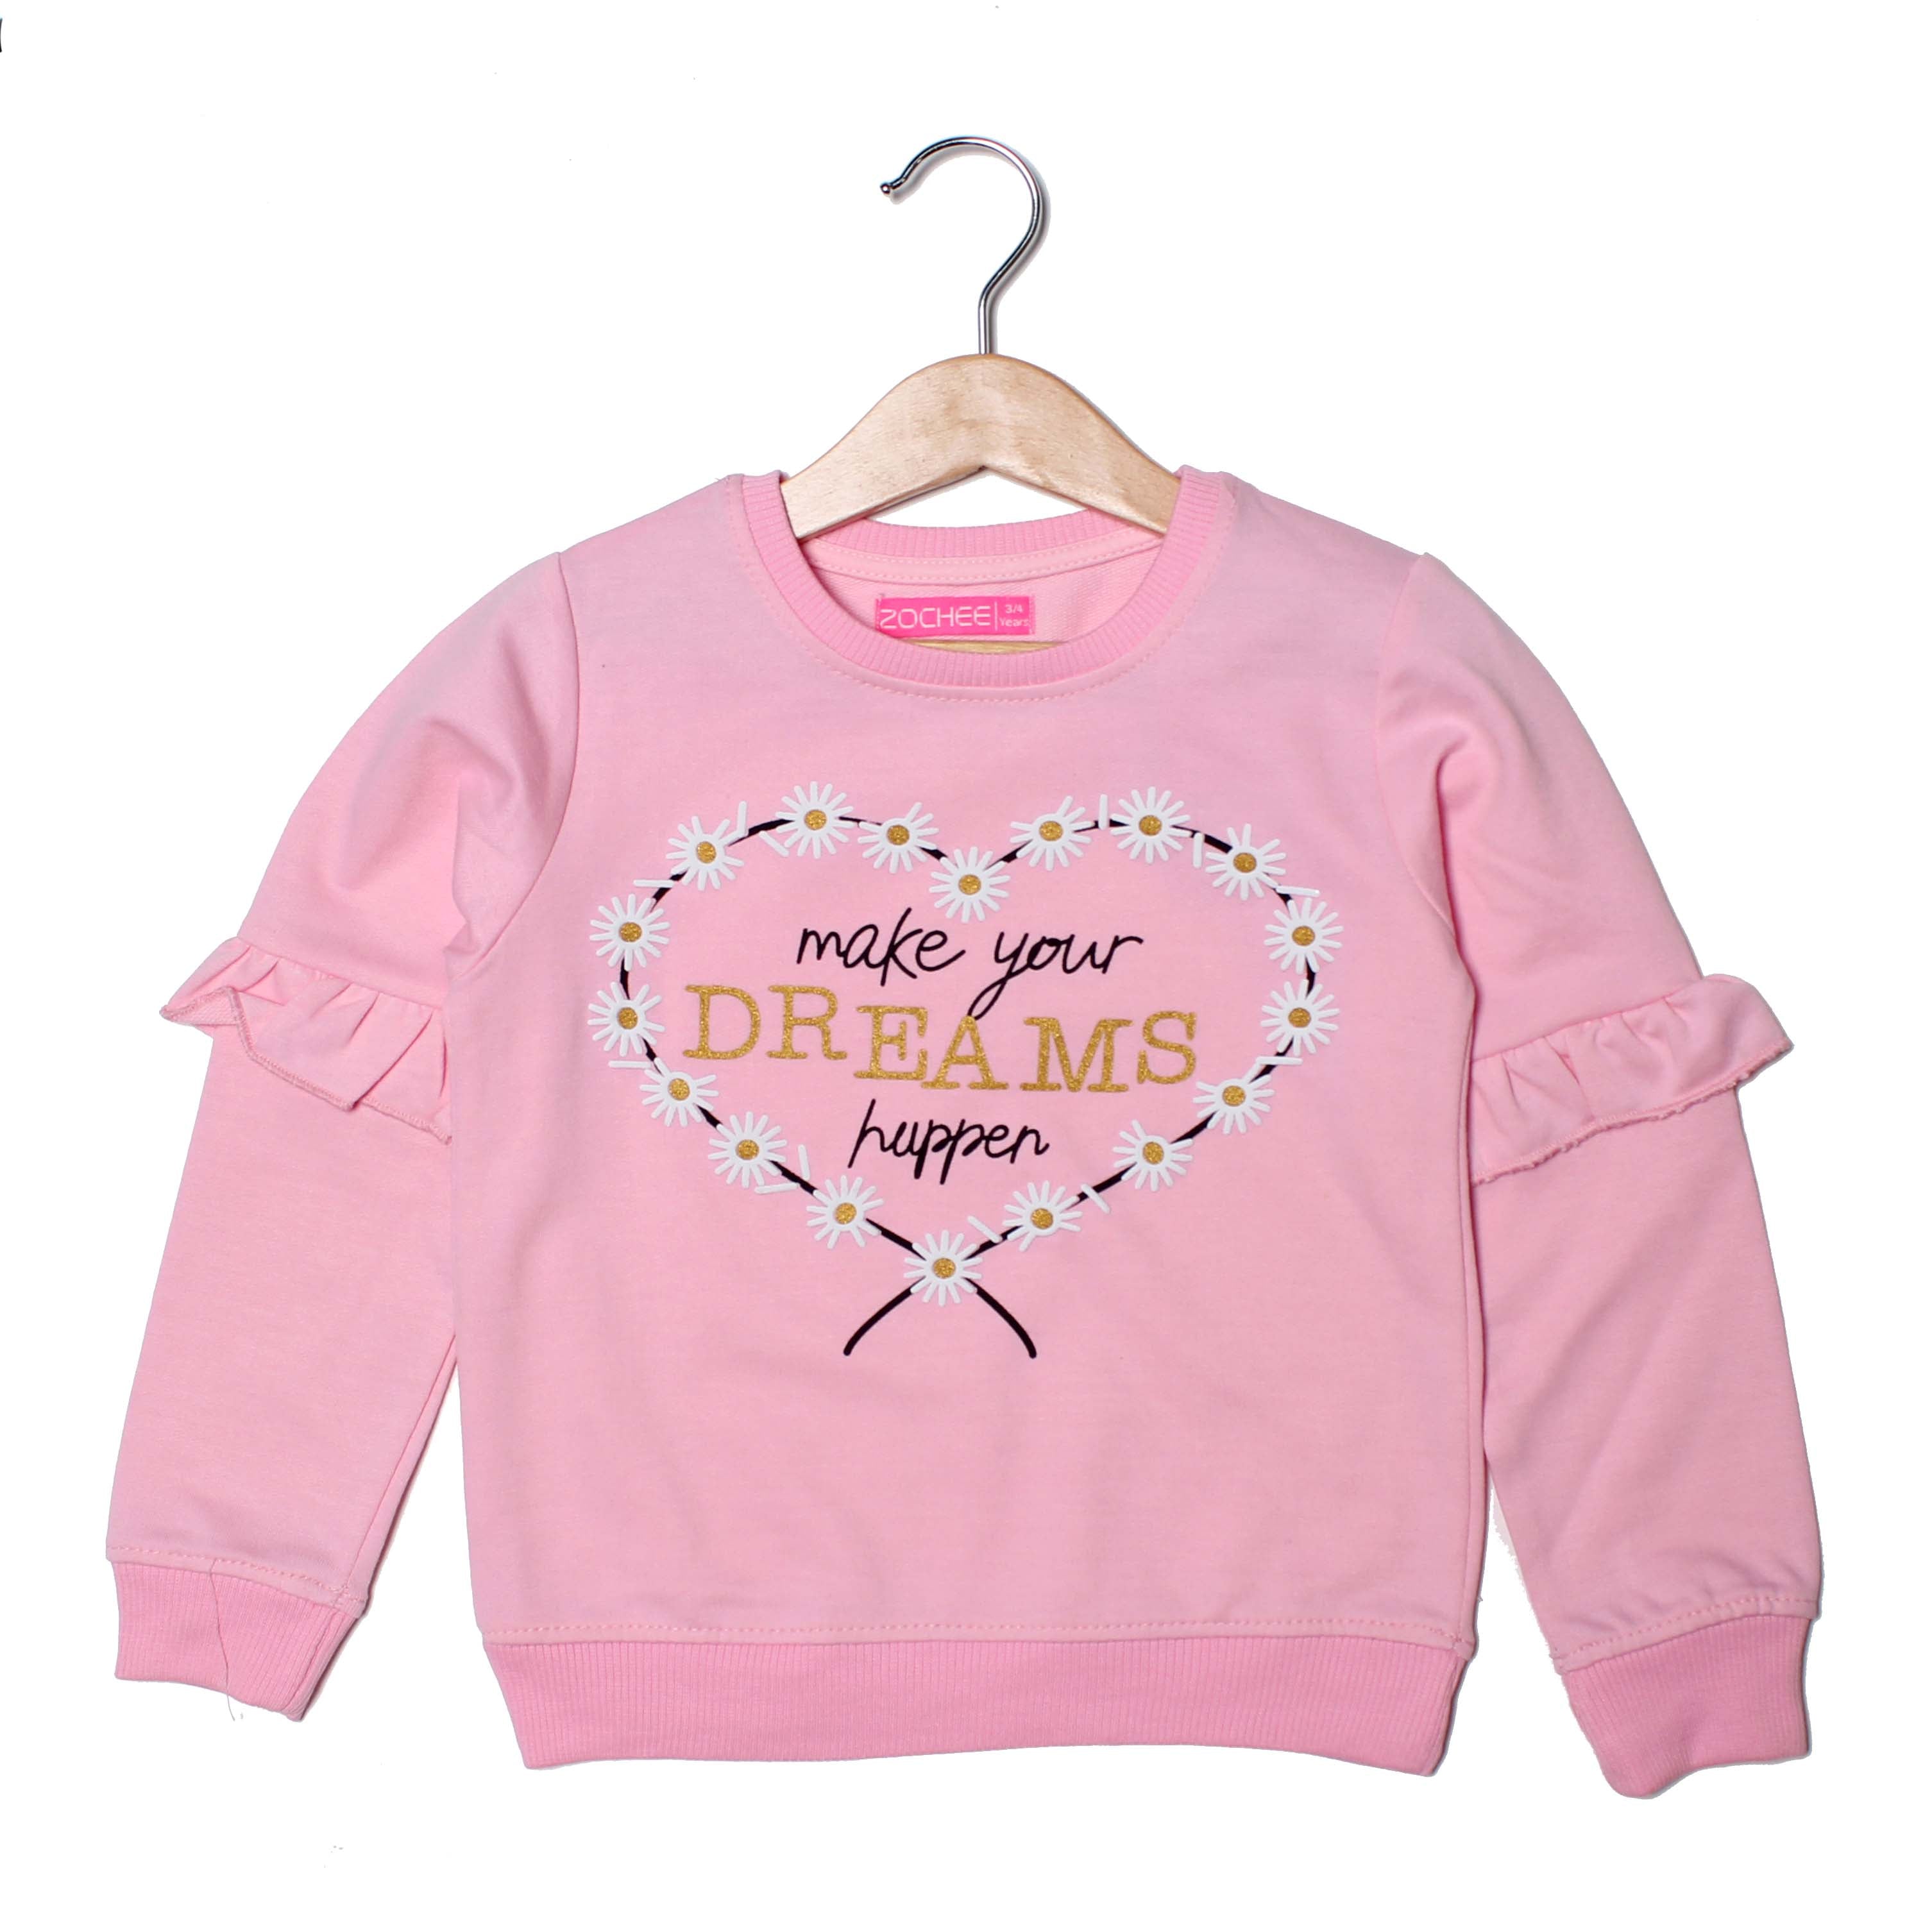 NEW PINK MAKE YOUR DREAMS PRINTED SWEATSHIRT FOR GIRLS